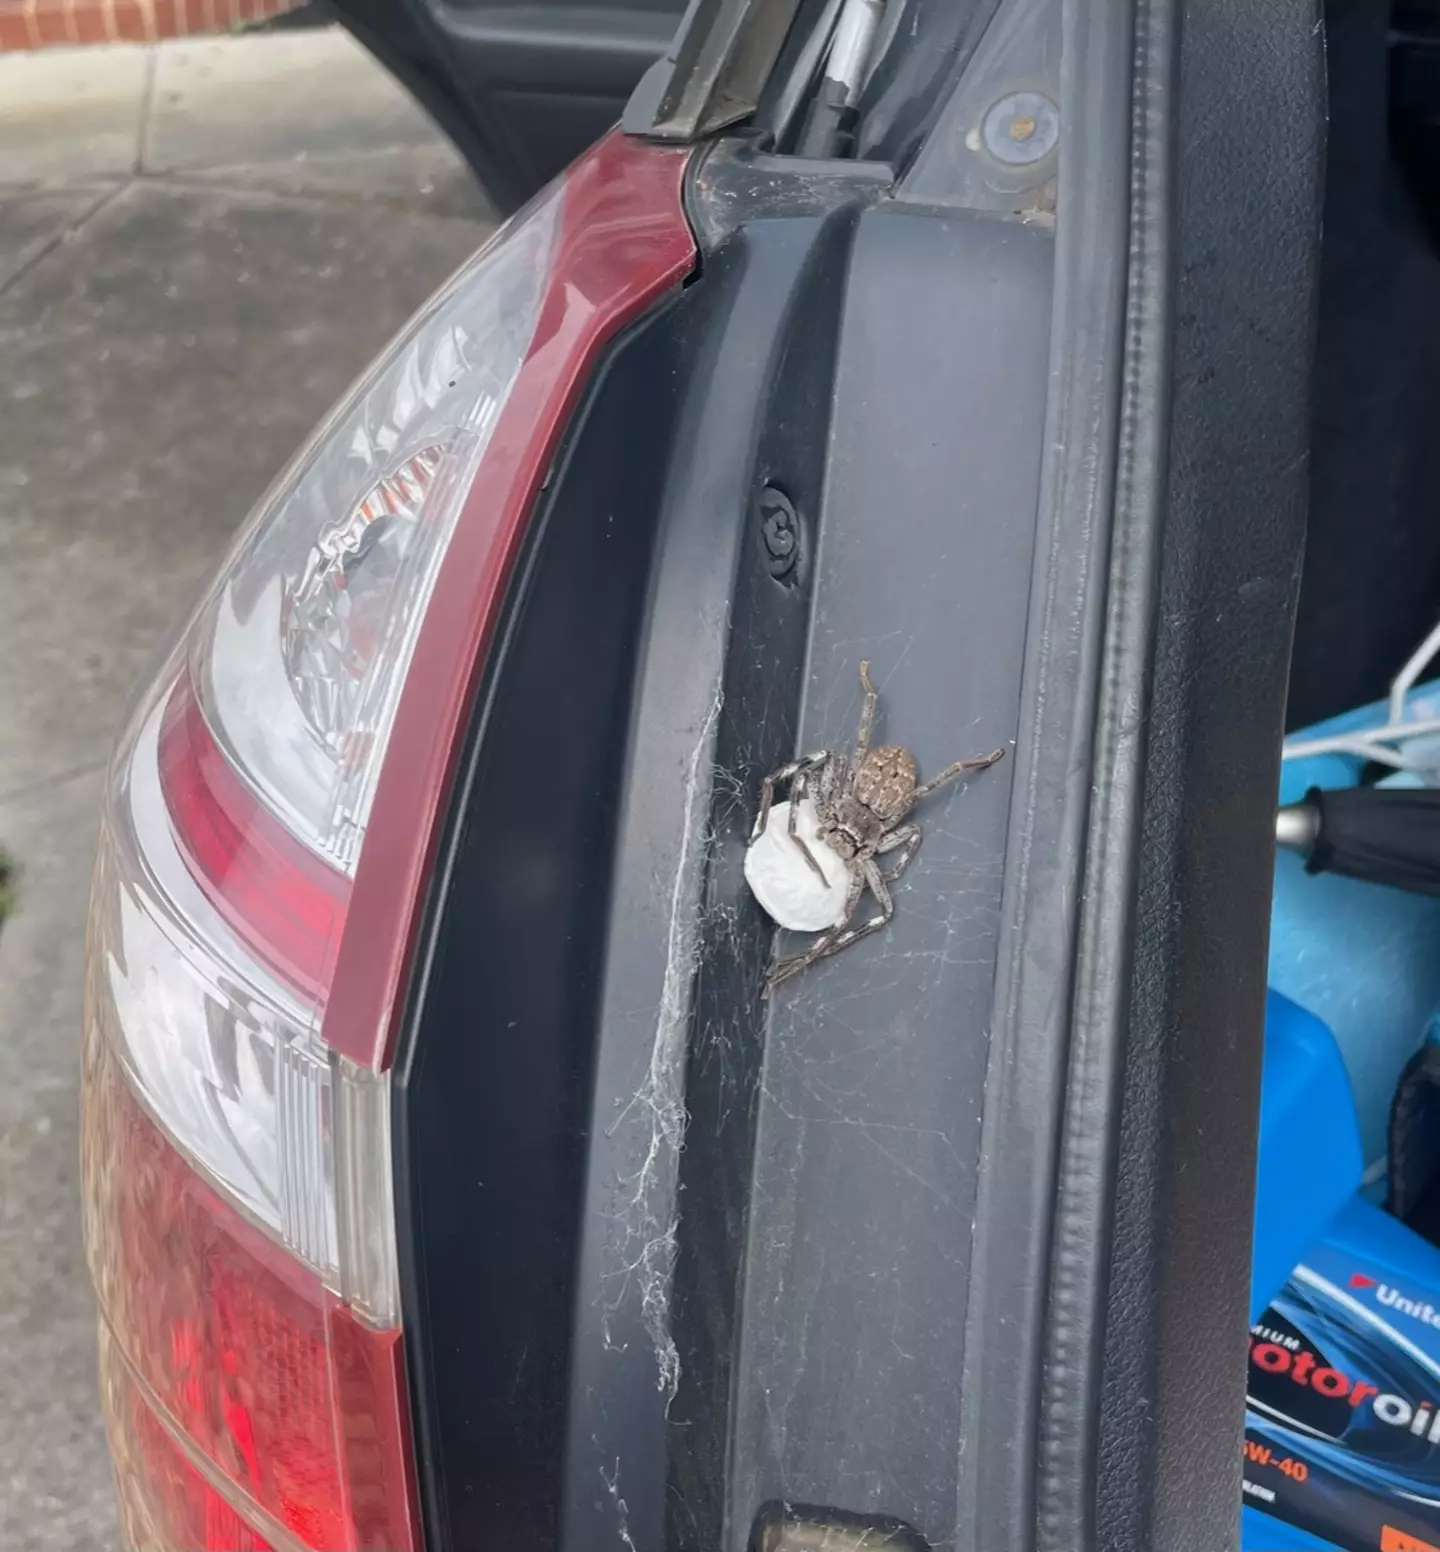 Jared was greeted by an unwanted visitor when he opened his car boot.